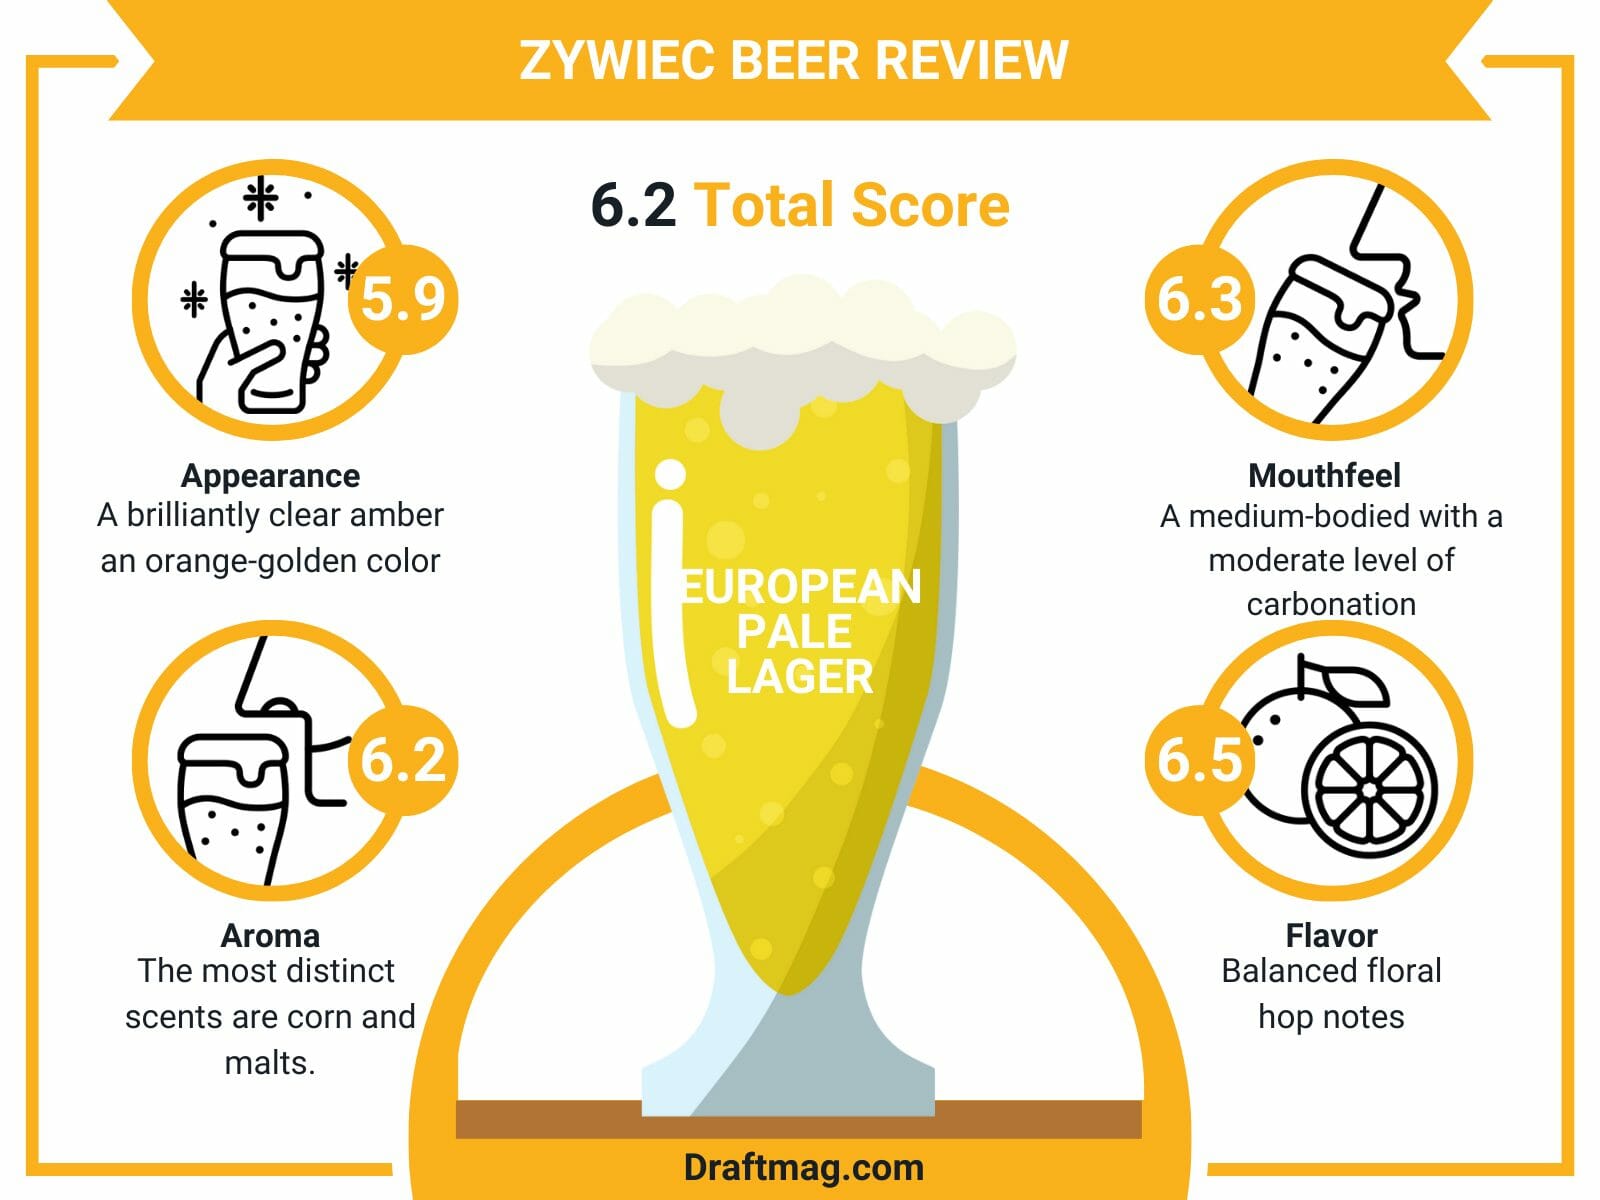 Zywiec beer review infographic